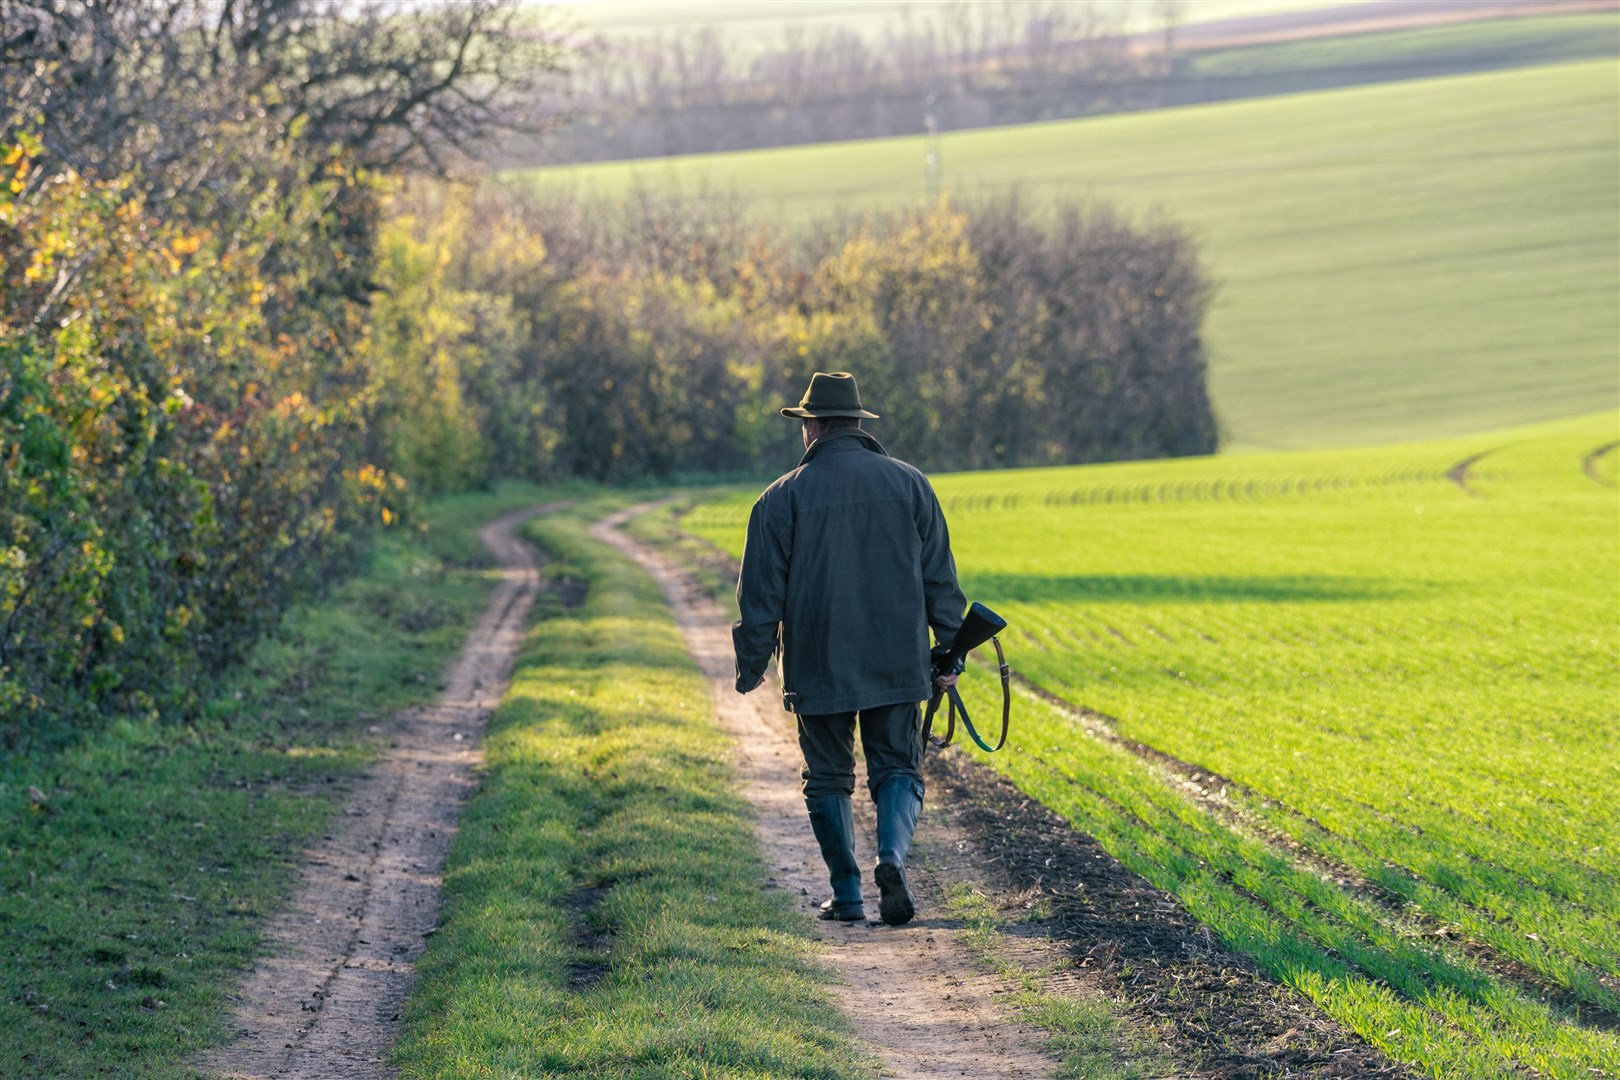 Many gamekeepers have experienced incidents of abuse, according to new research.